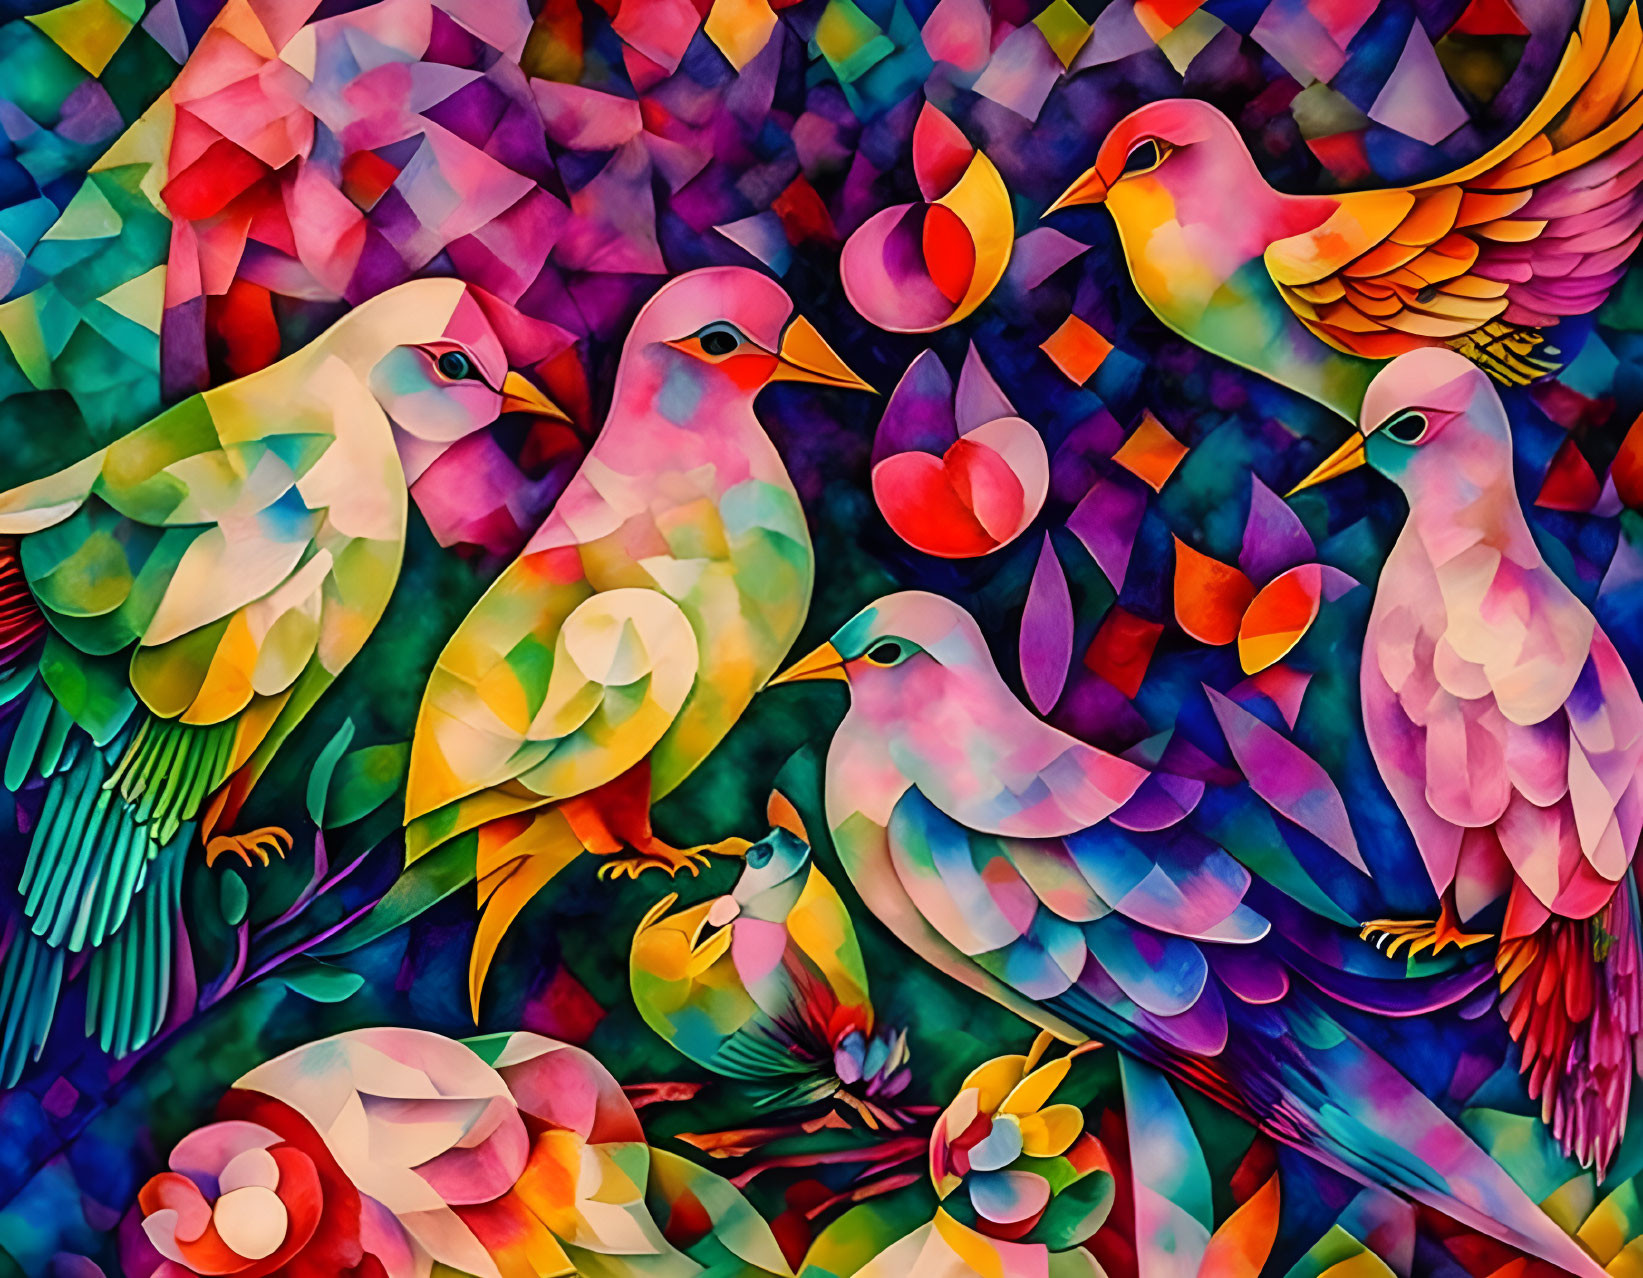 Vibrant geometric bird painting with abstract floral elements